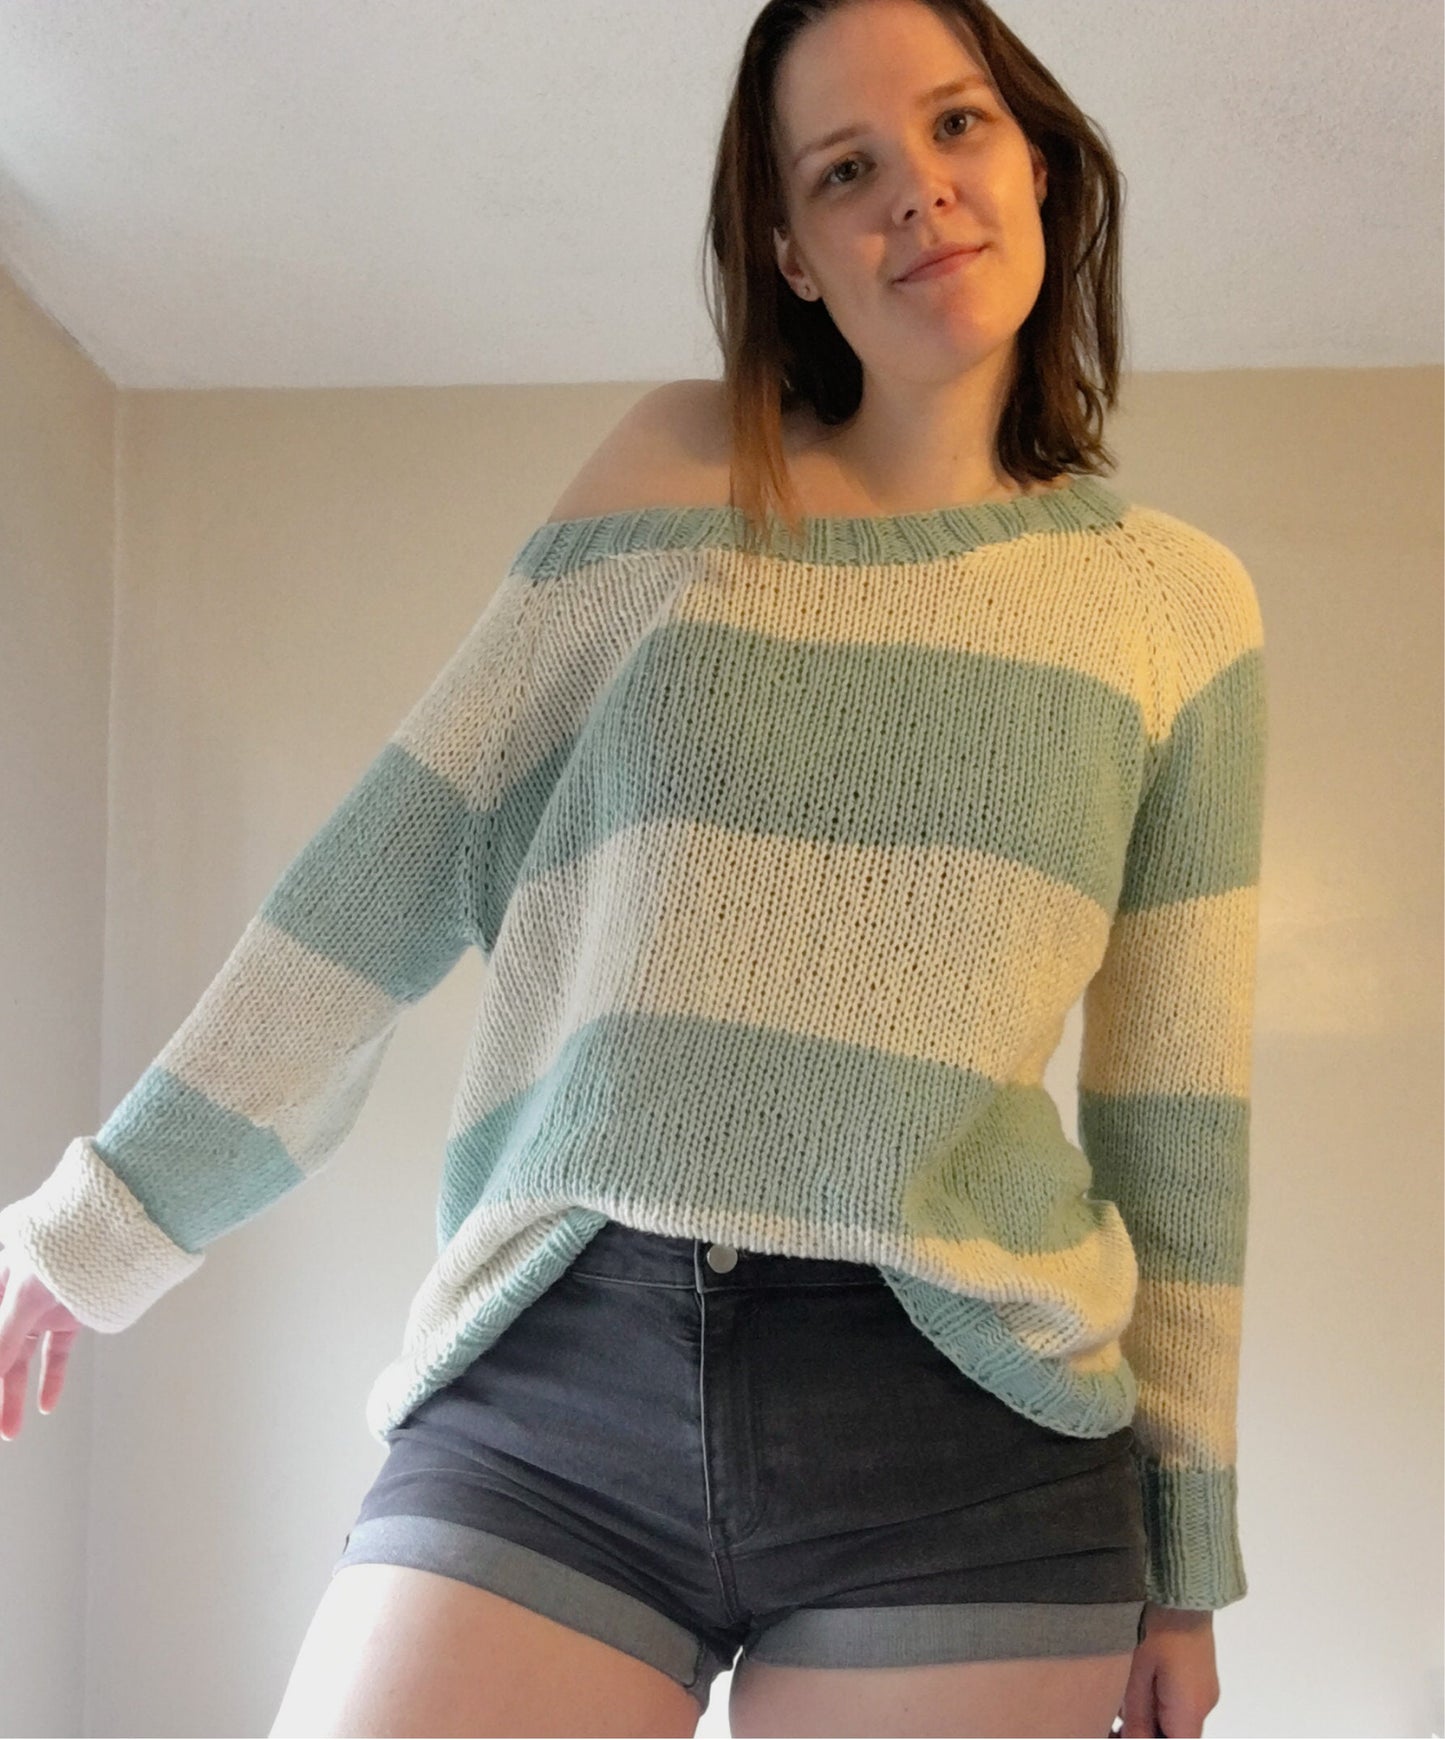 Clam Bake Pullover Knitting Pattern